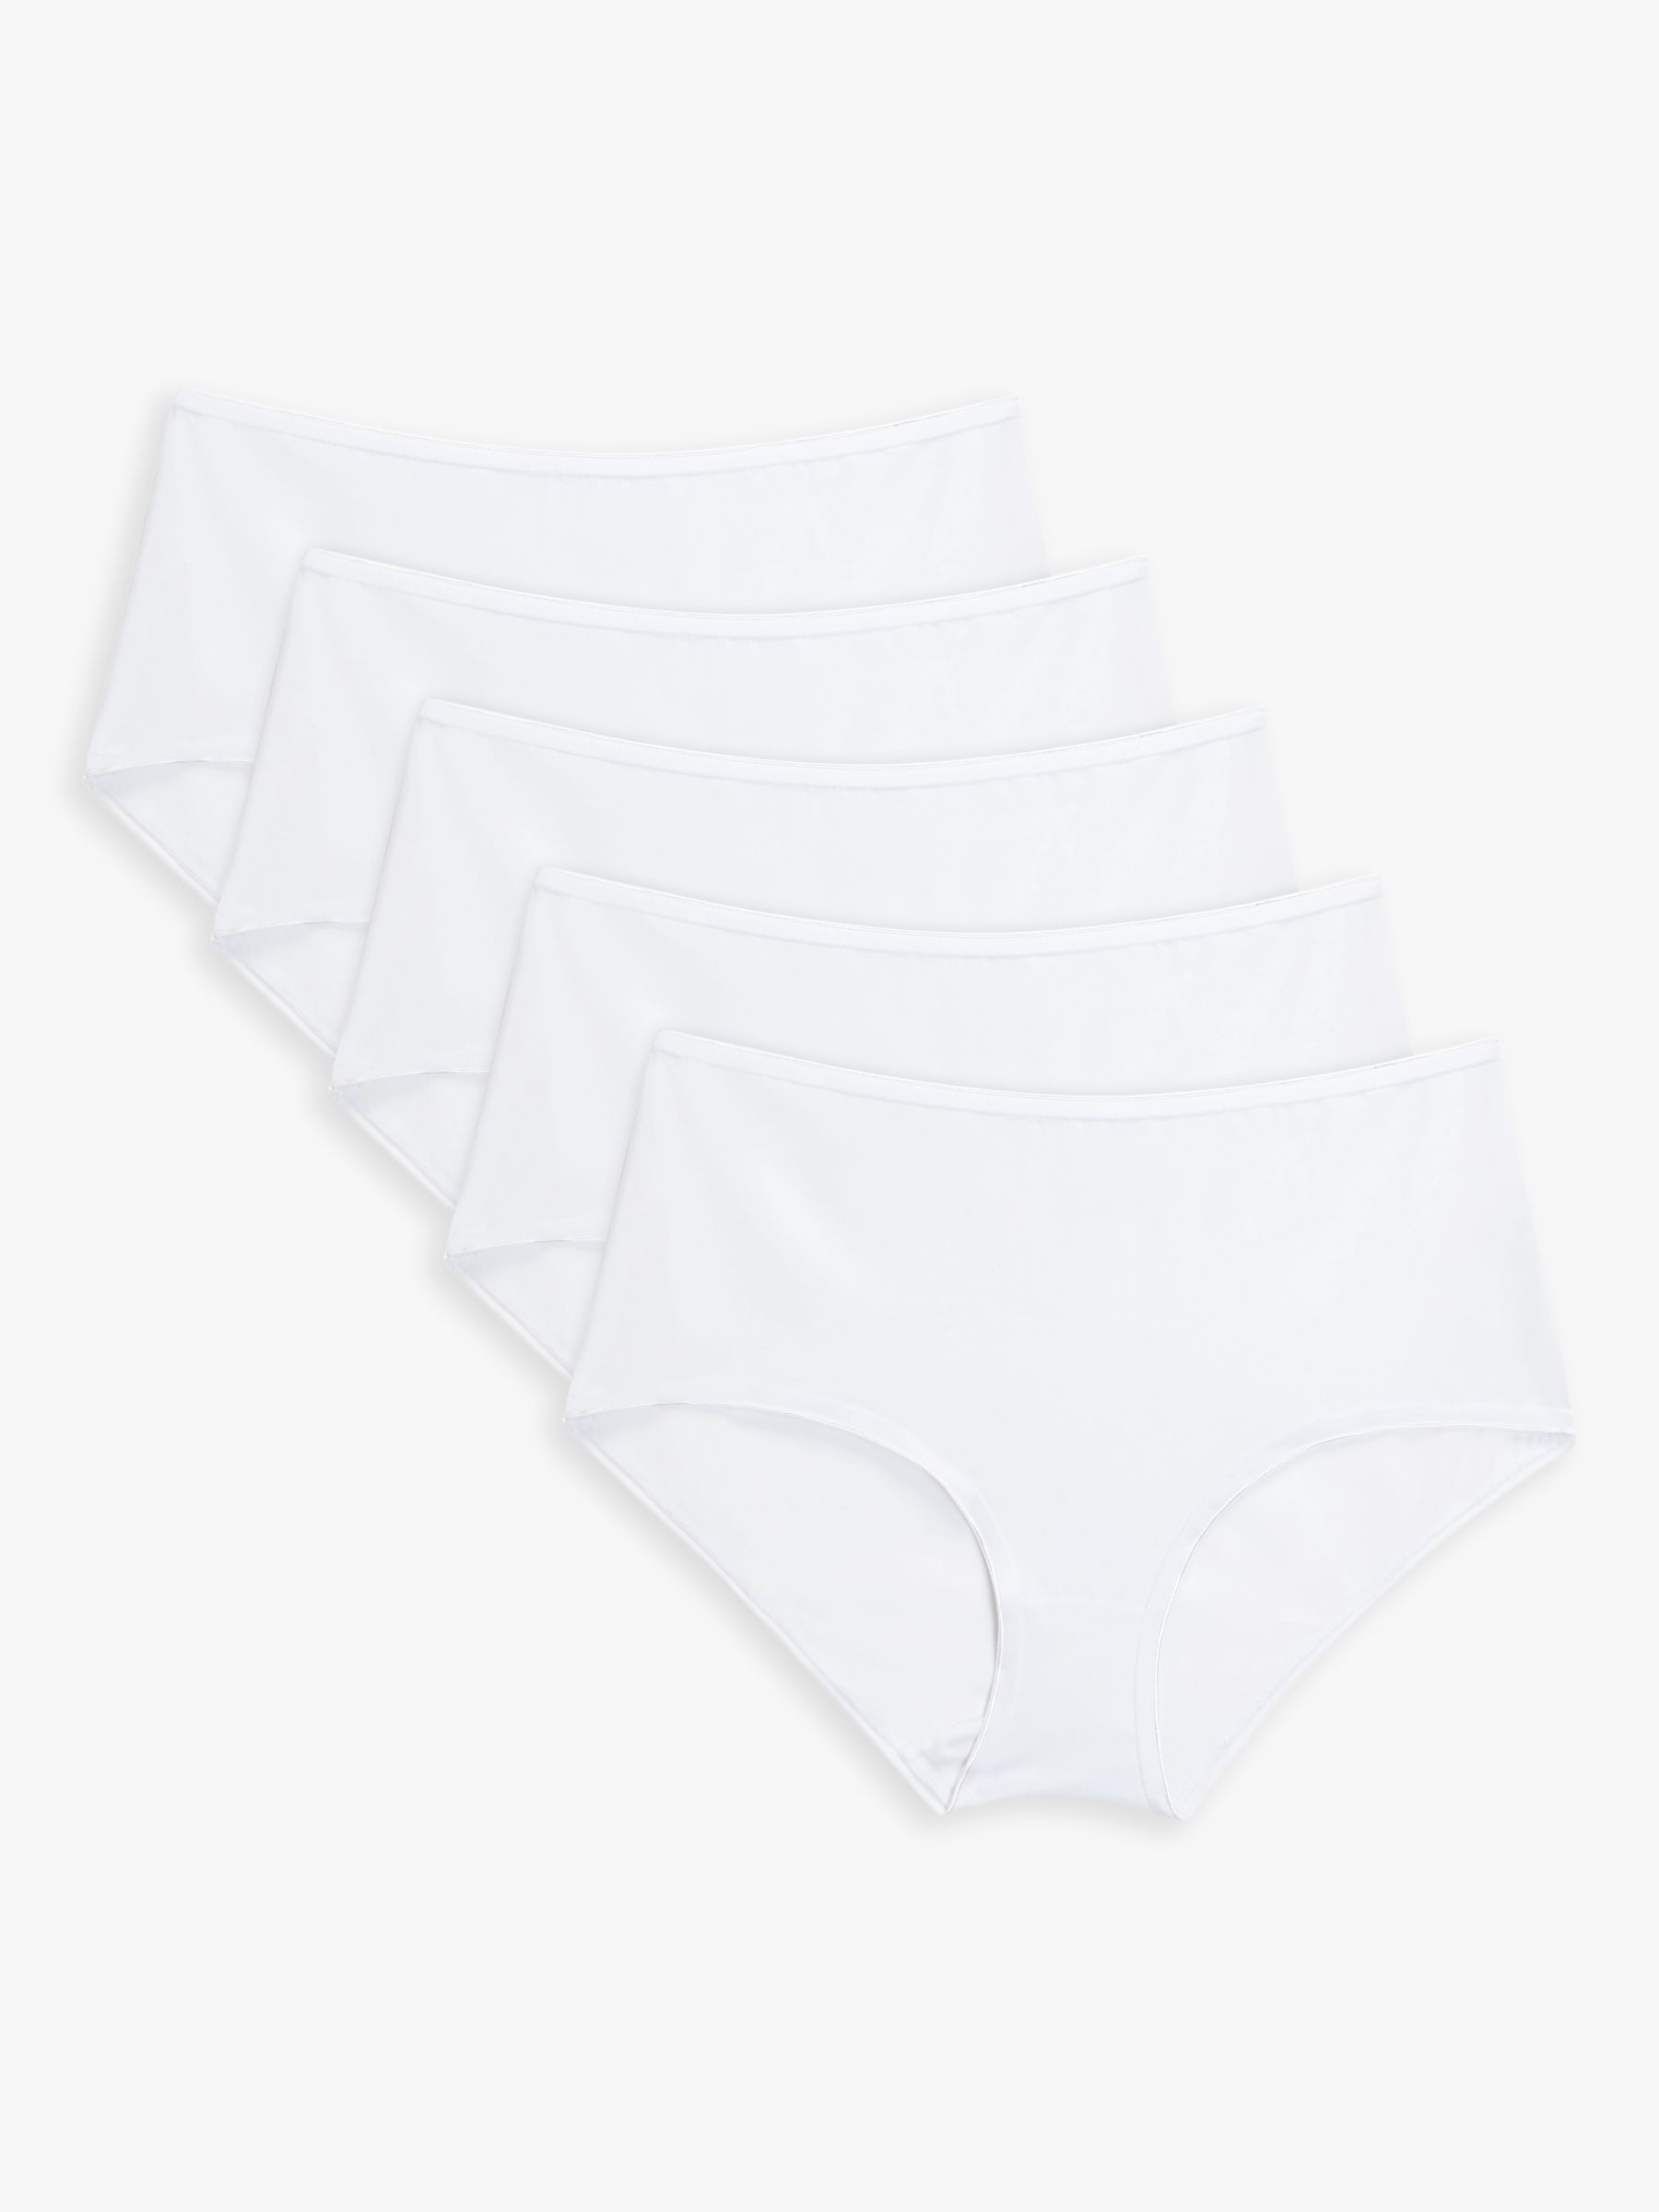 John Lewis ANYDAY Cotton Full Briefs, Pack of 5, White at John Lewis &  Partners